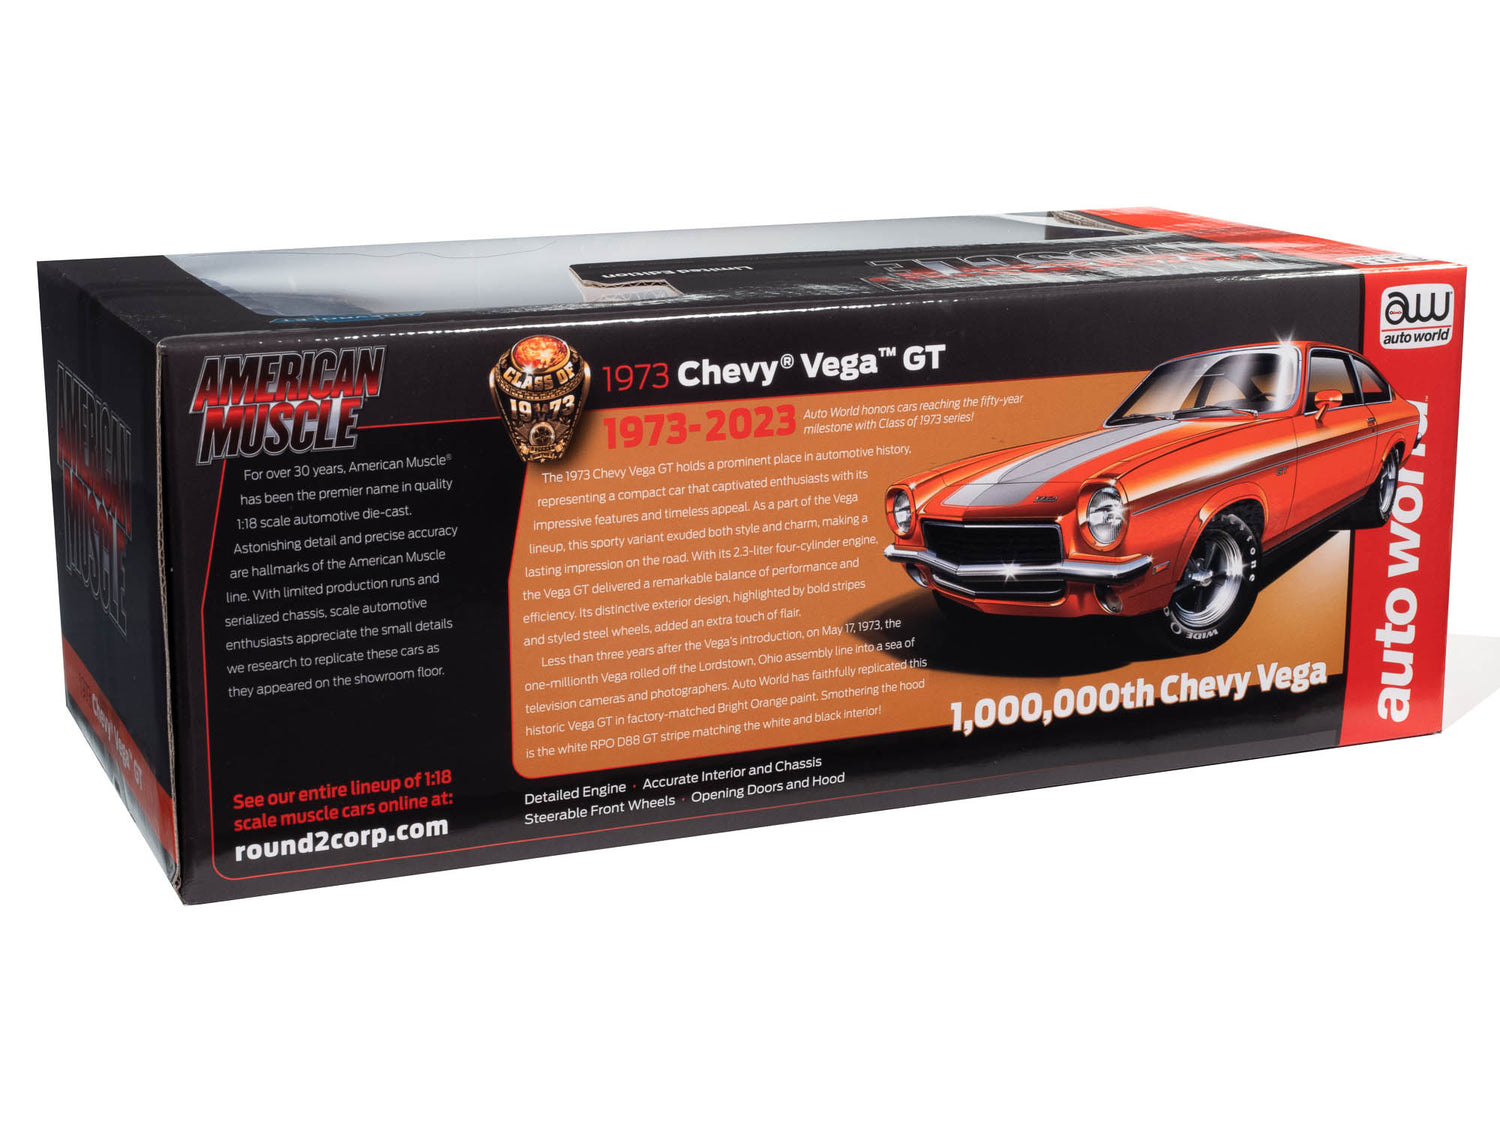 American Muscle 1973 Chevrolet Vega GT (Class of 1973) 1:18 Scale Diecast